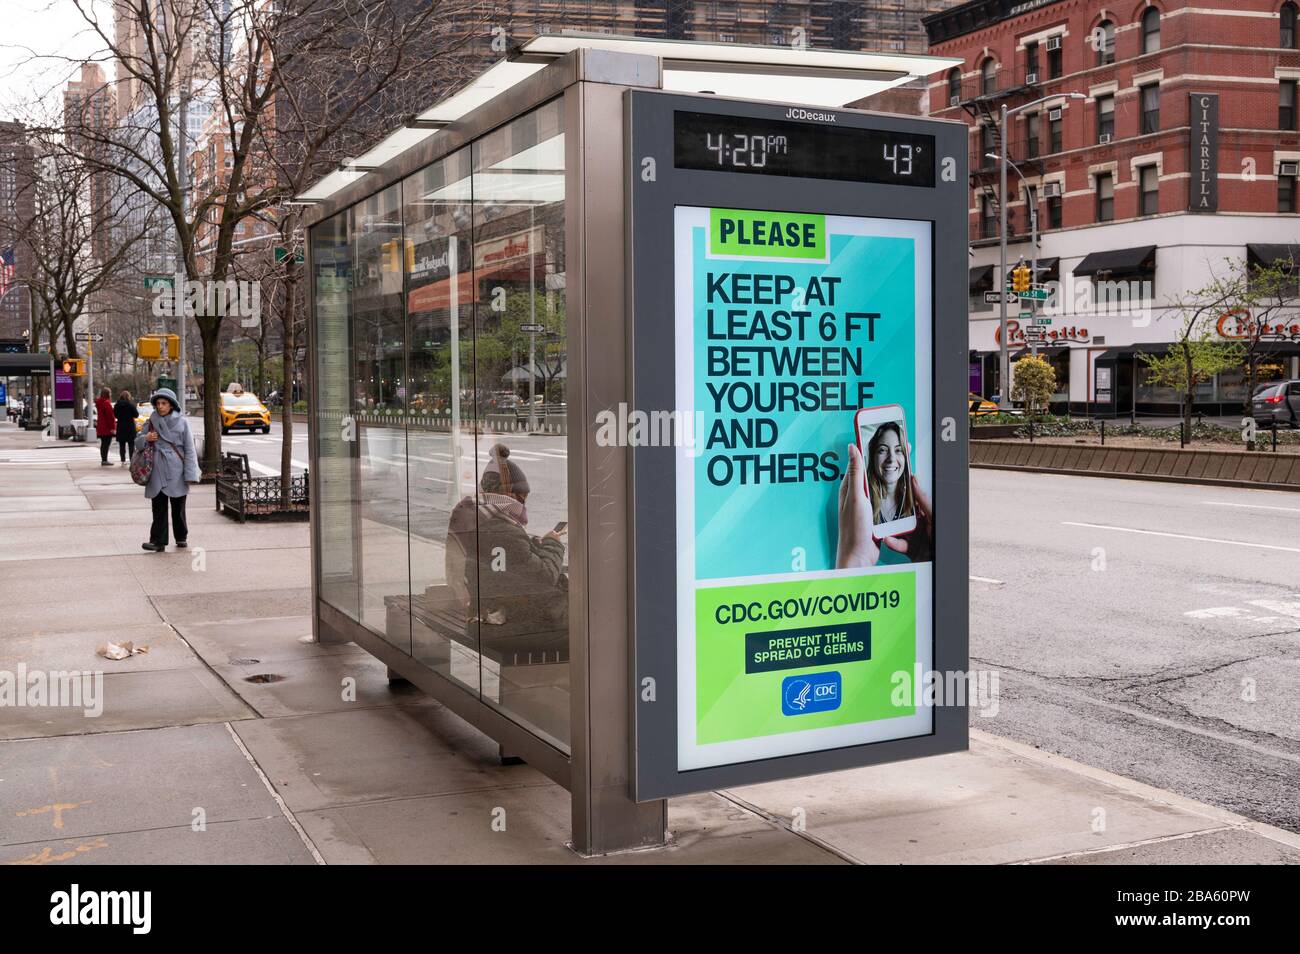 NEW YORK, NY - MARCH 25, 2020. Public Service message regarding the Coronavirus outbreak is displayed on a bus shelter on the Upper West Side of Manhattan in New York City. The World Health Organization declared coronavirus (COVID-19) a global pandemic on March 11th. Stock Photo